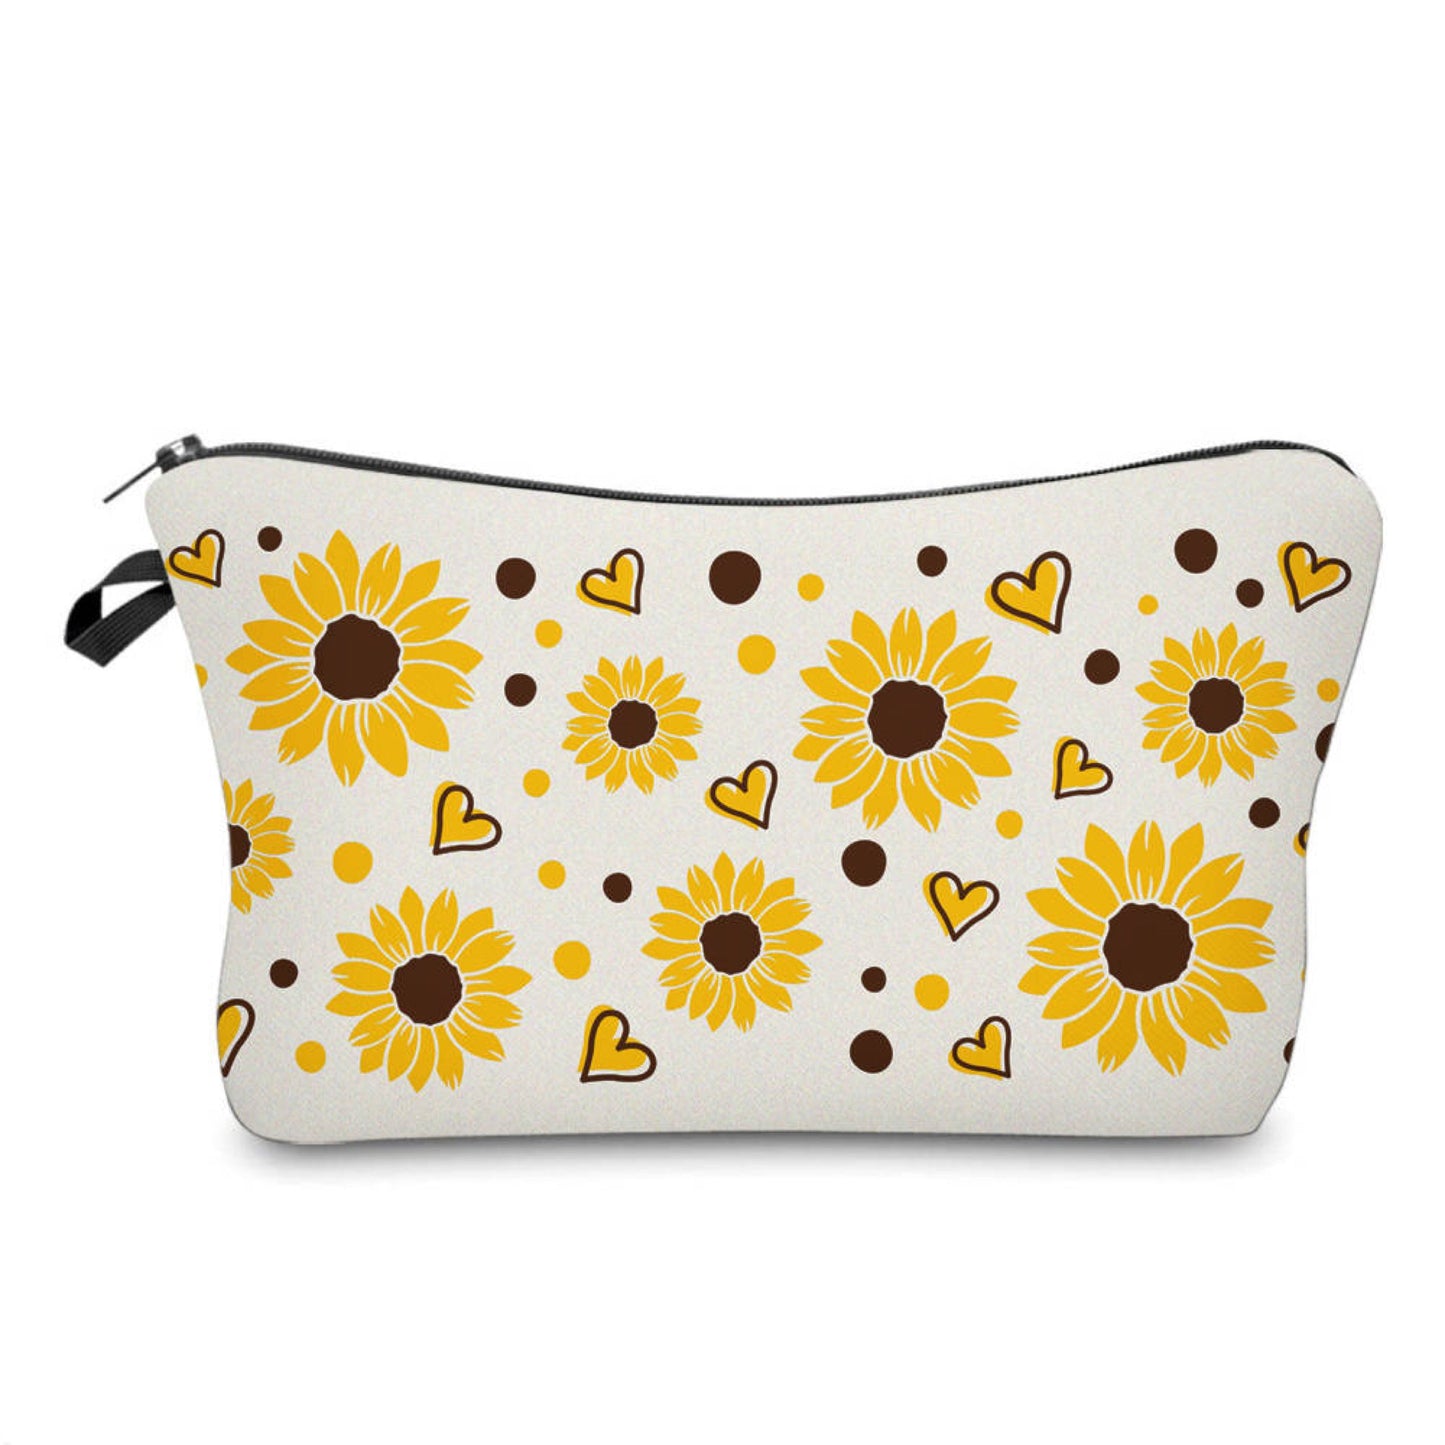 Sunflower Hearts - Water-Resistant Multi-Use Pouch